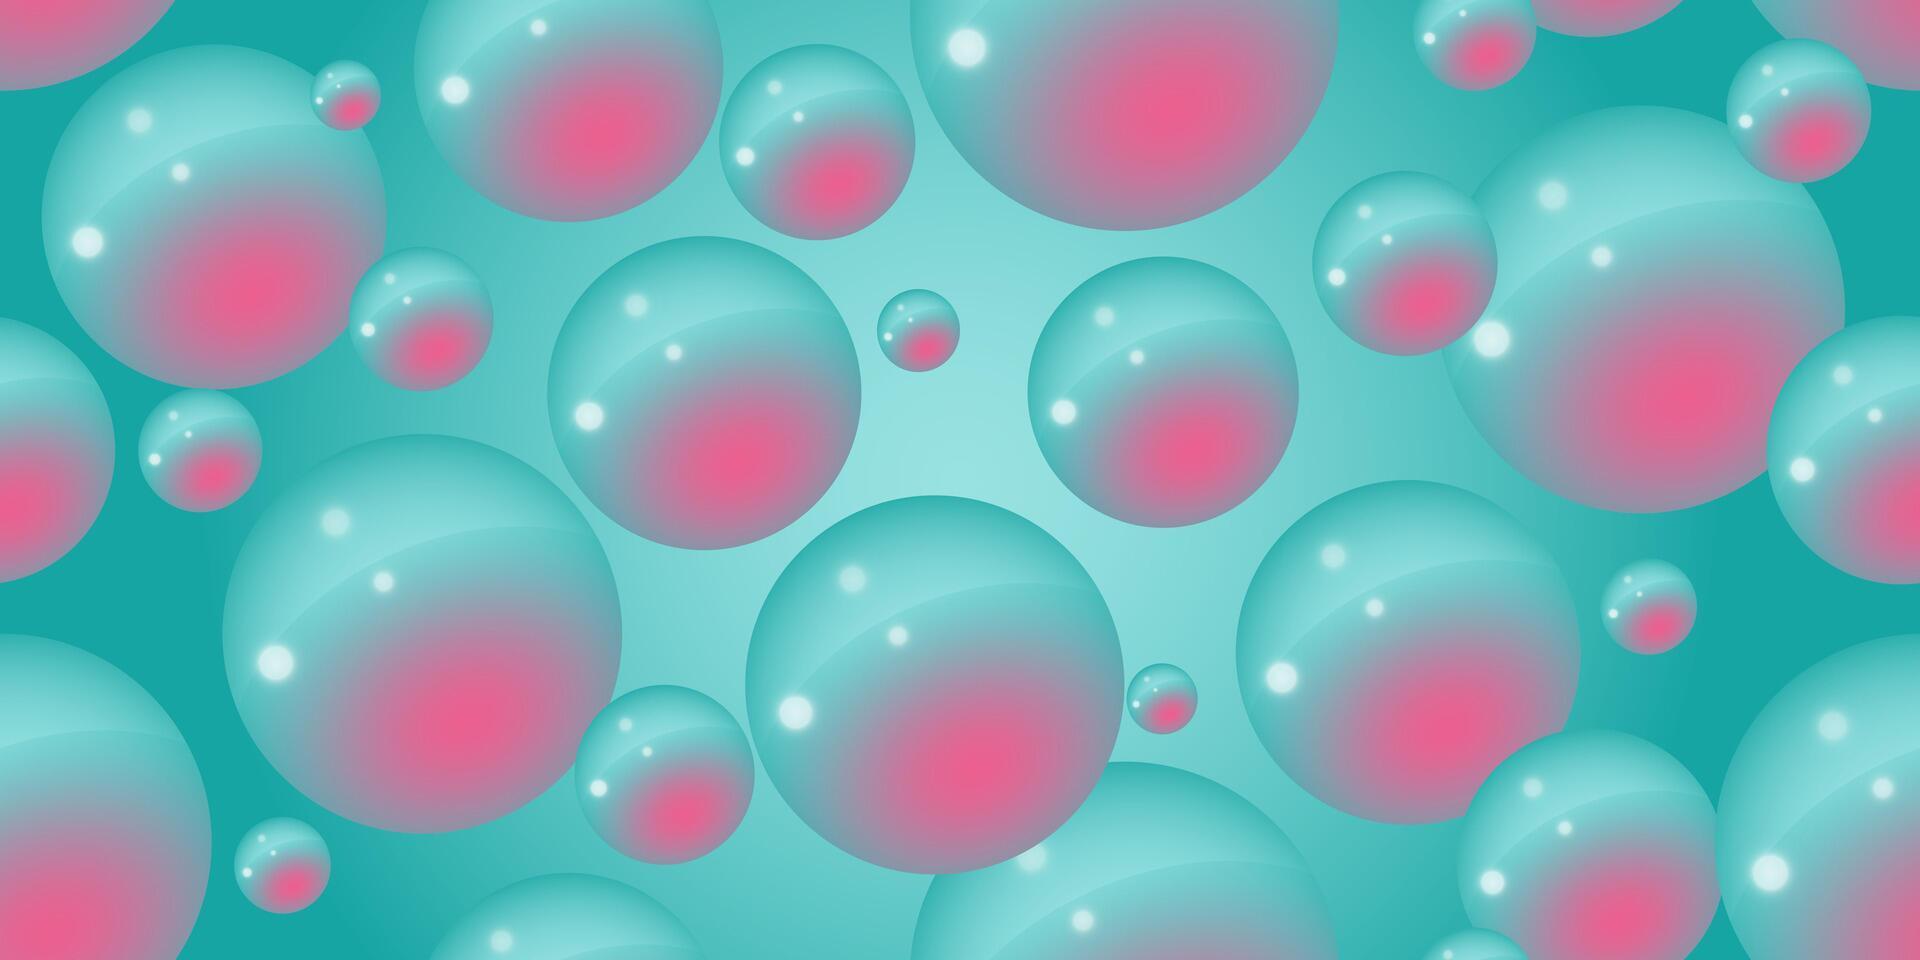 A pink bubbles on a turquoise background. Abstract bubble neon background. 3d texture of liquid with blobs in y2k style. Seamless pattern. Vector illustration.